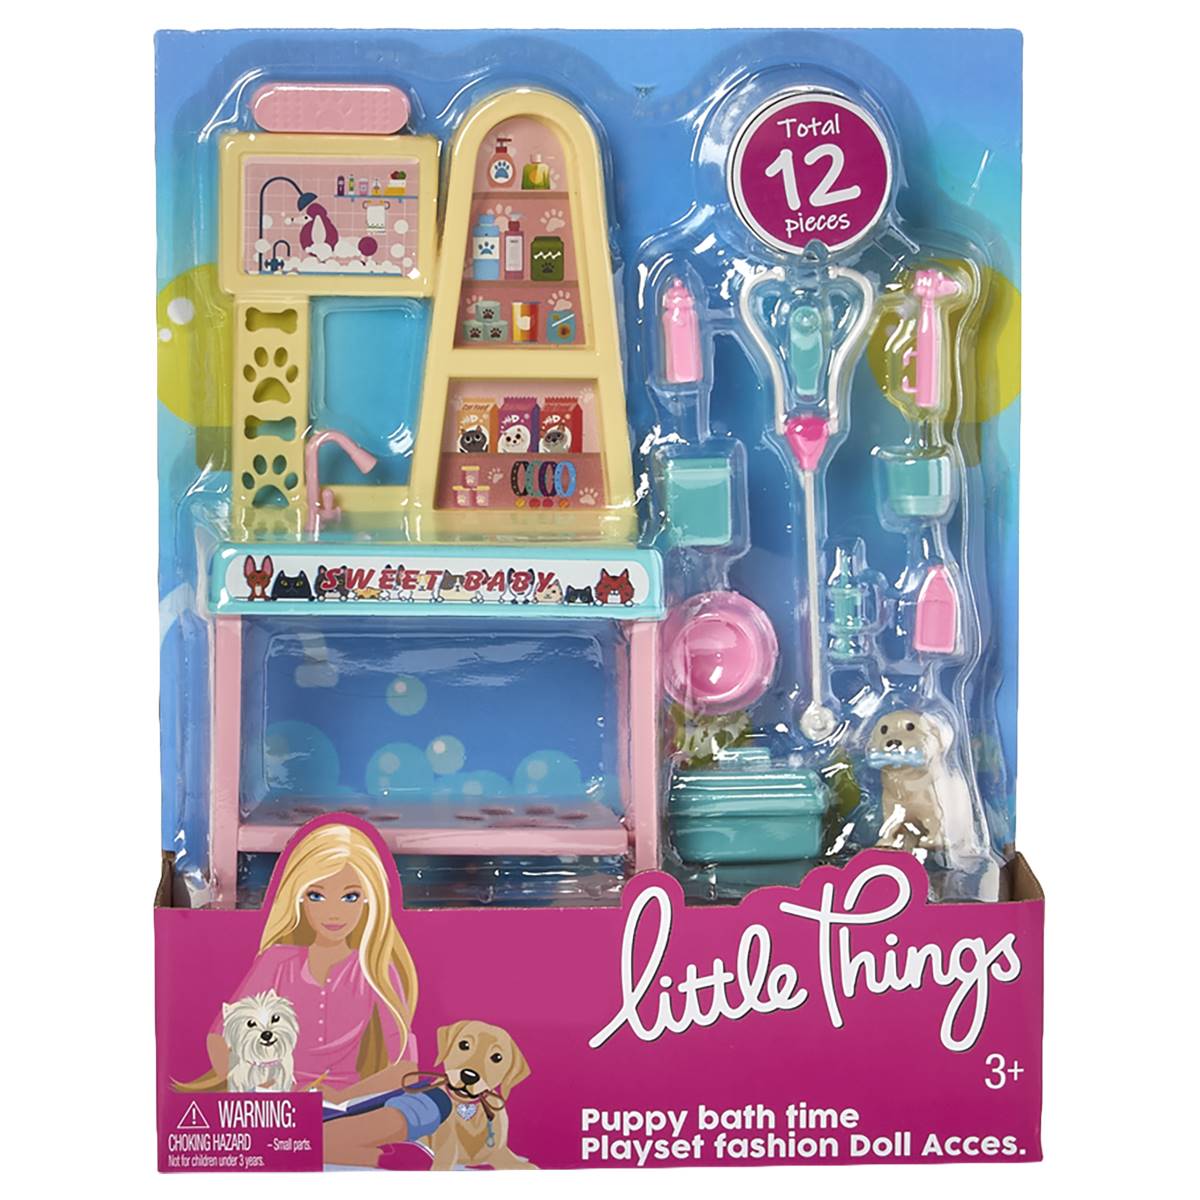 Little Things Puppy Bath Time Playset